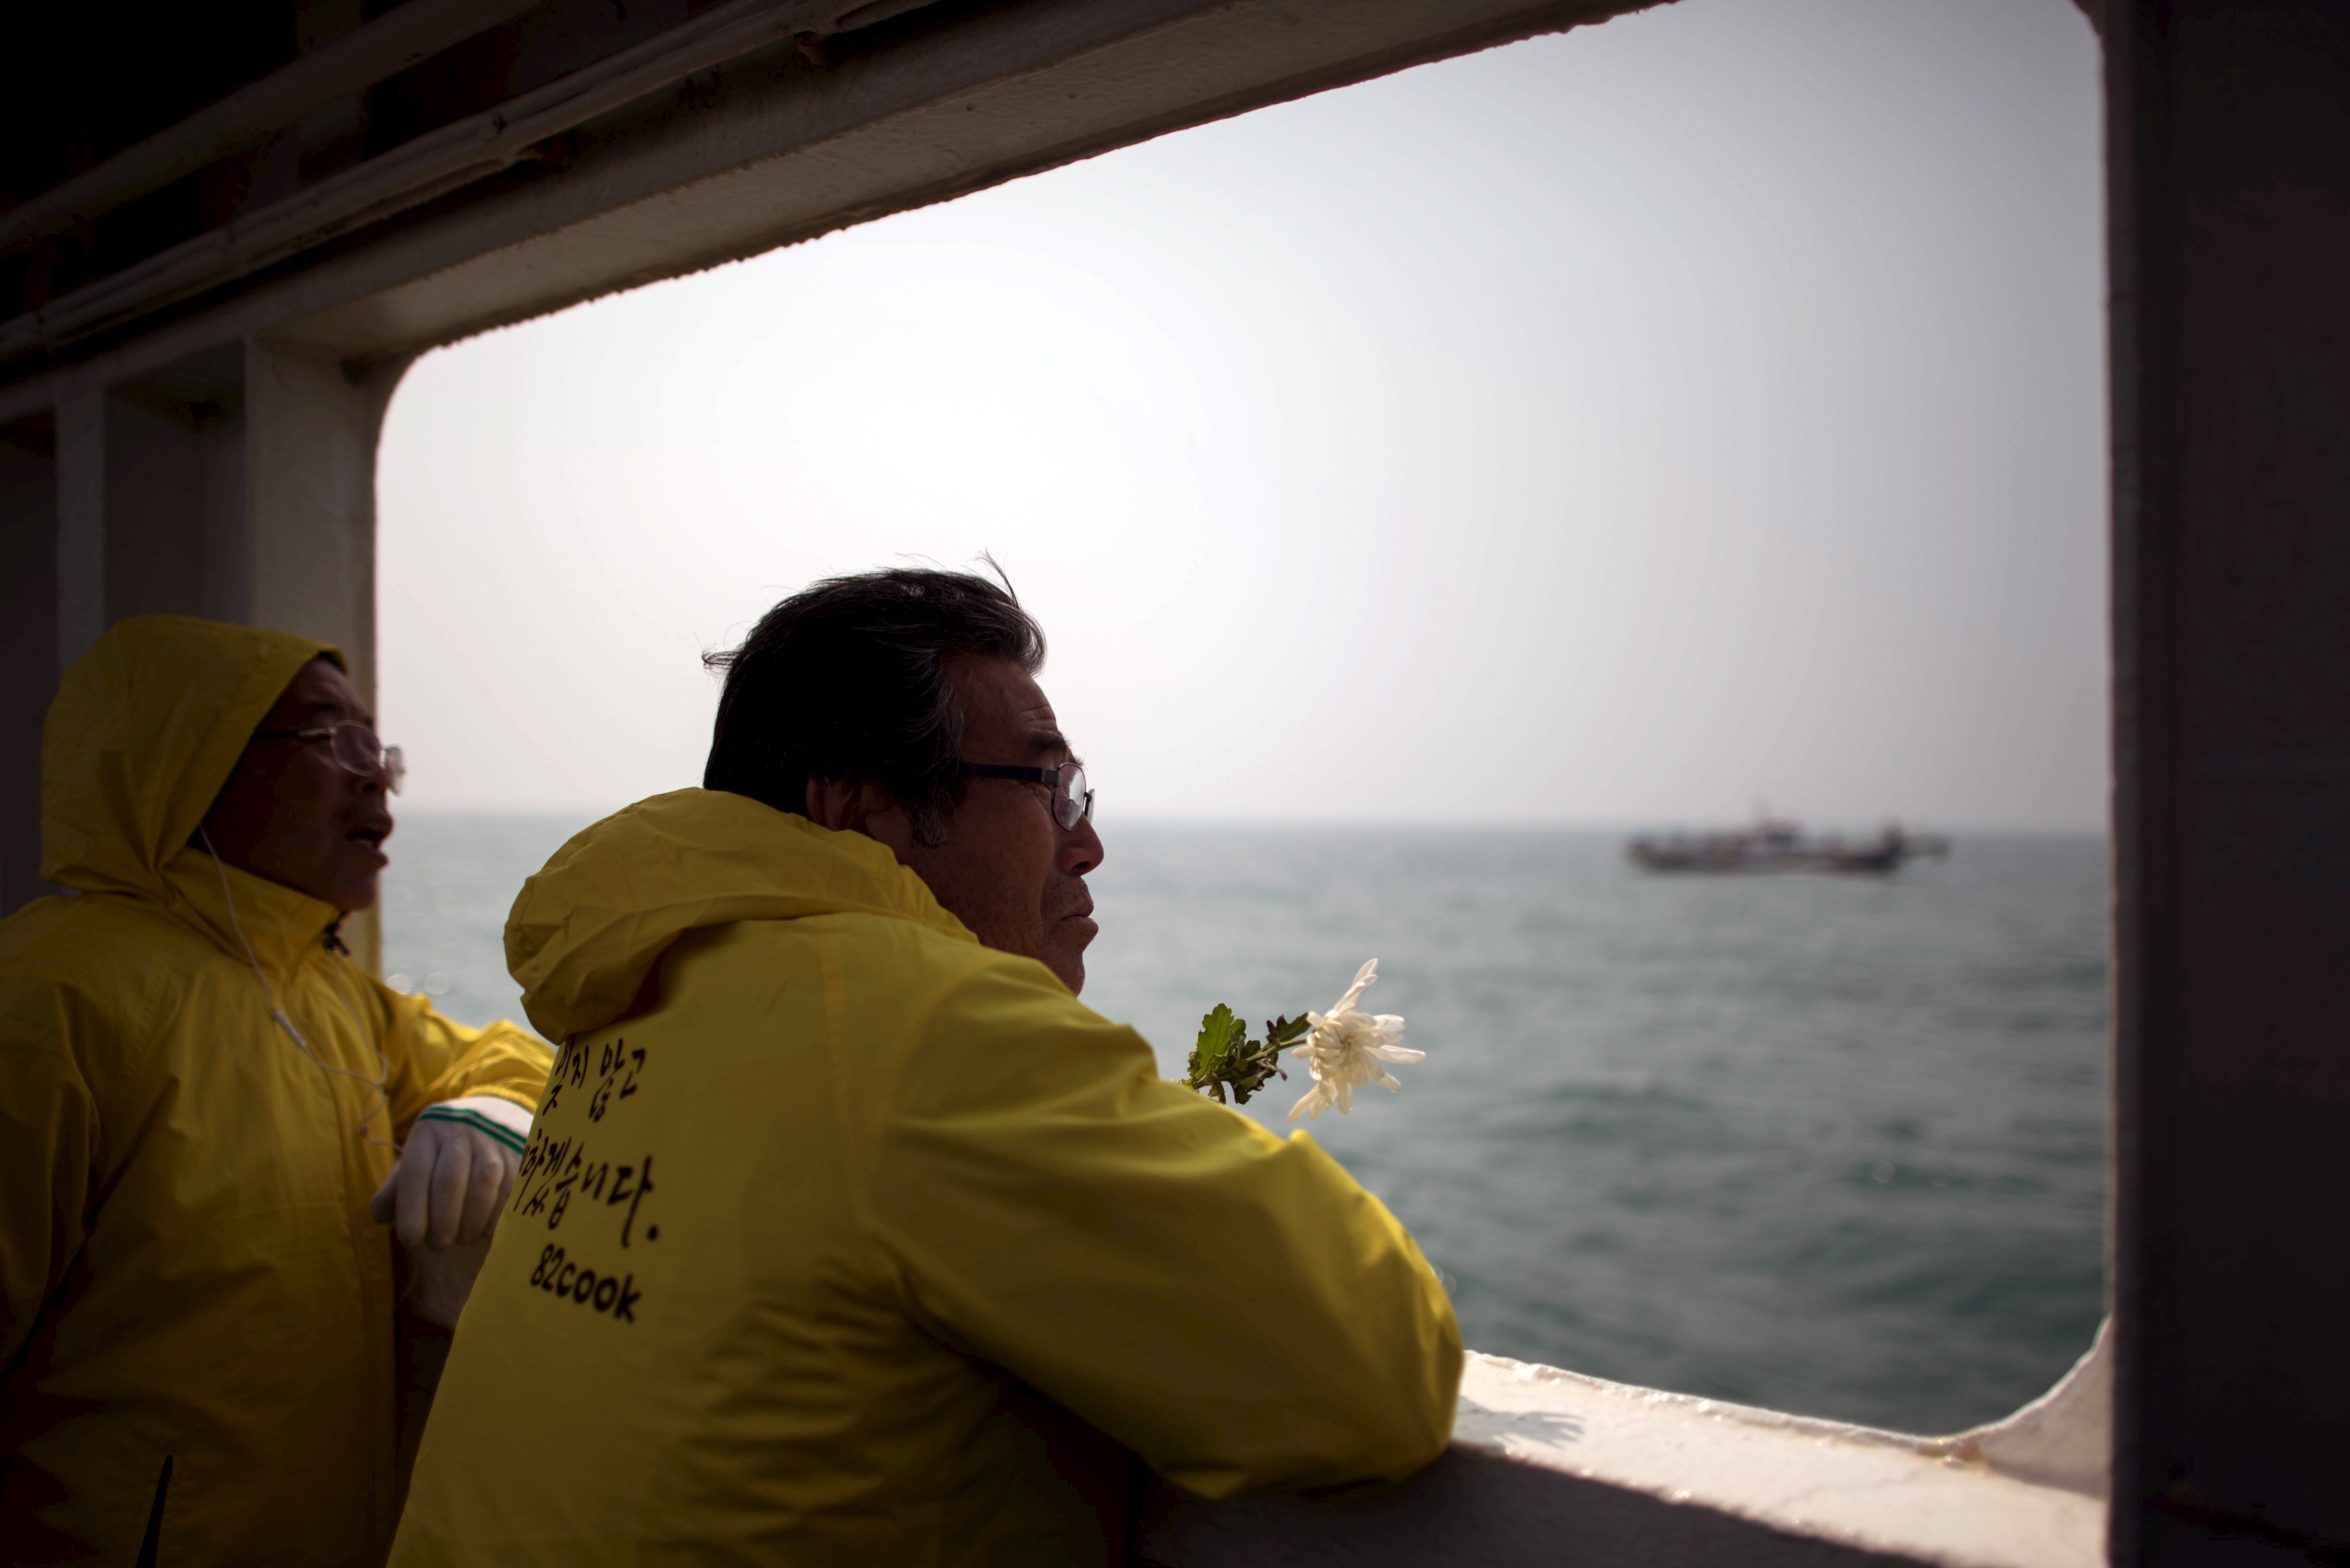 A relative of a victim of the Sewol ferry disaster holds a flower as he stands on the deck of a boat during a visit to the site of the sunken ferry, off the coast of South Korea's southern island of Jindo April 15, 2015 (Ed Jones—Reuters)